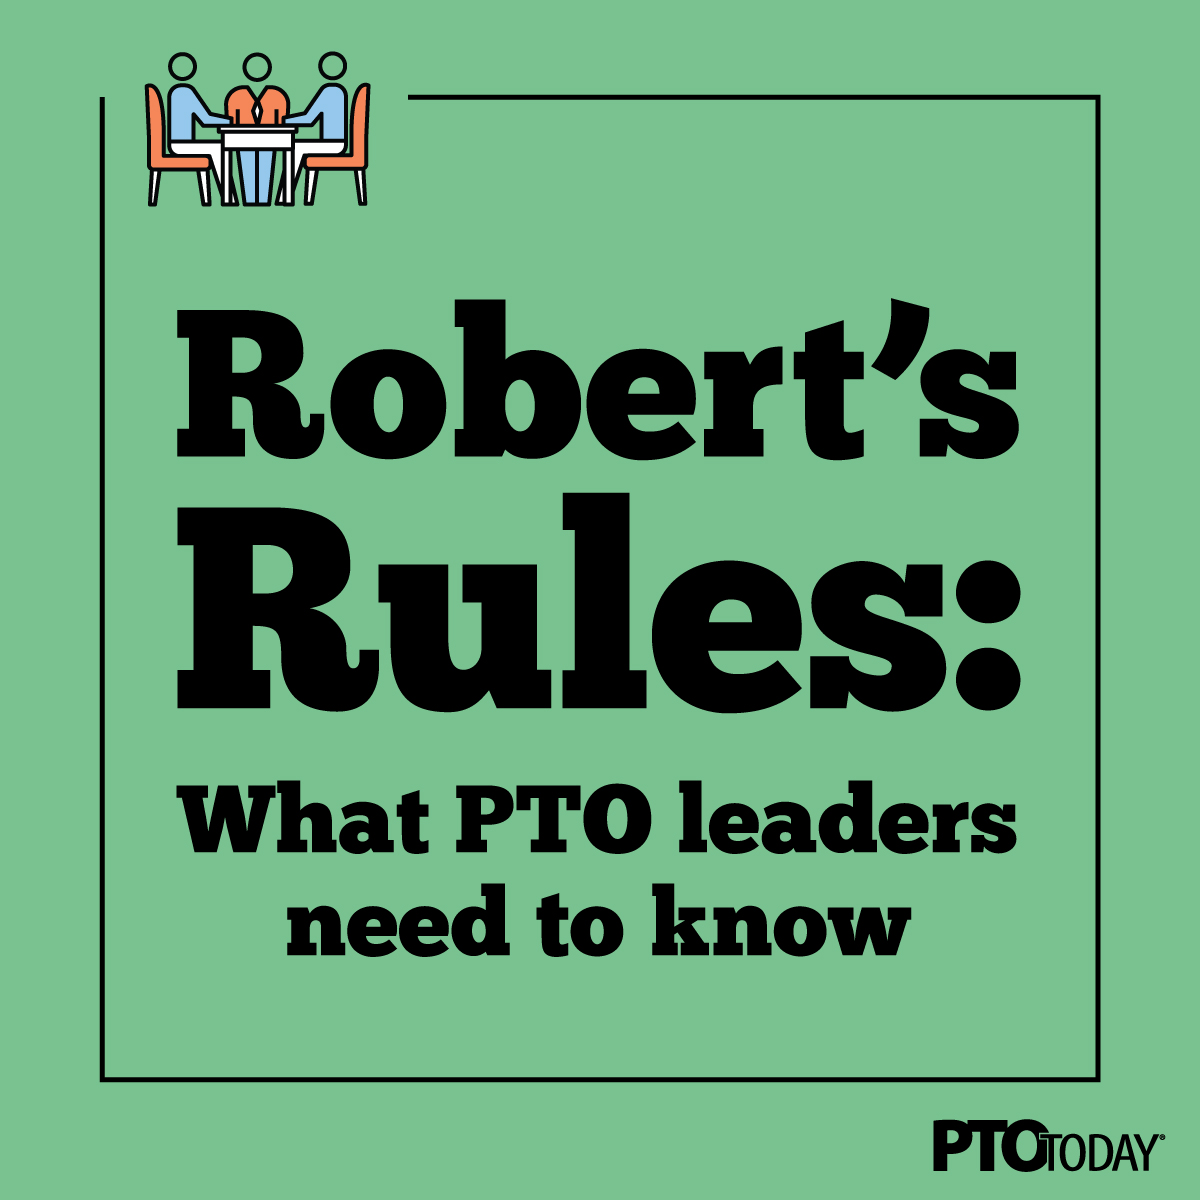 What's the big deal about Robert's Rules?